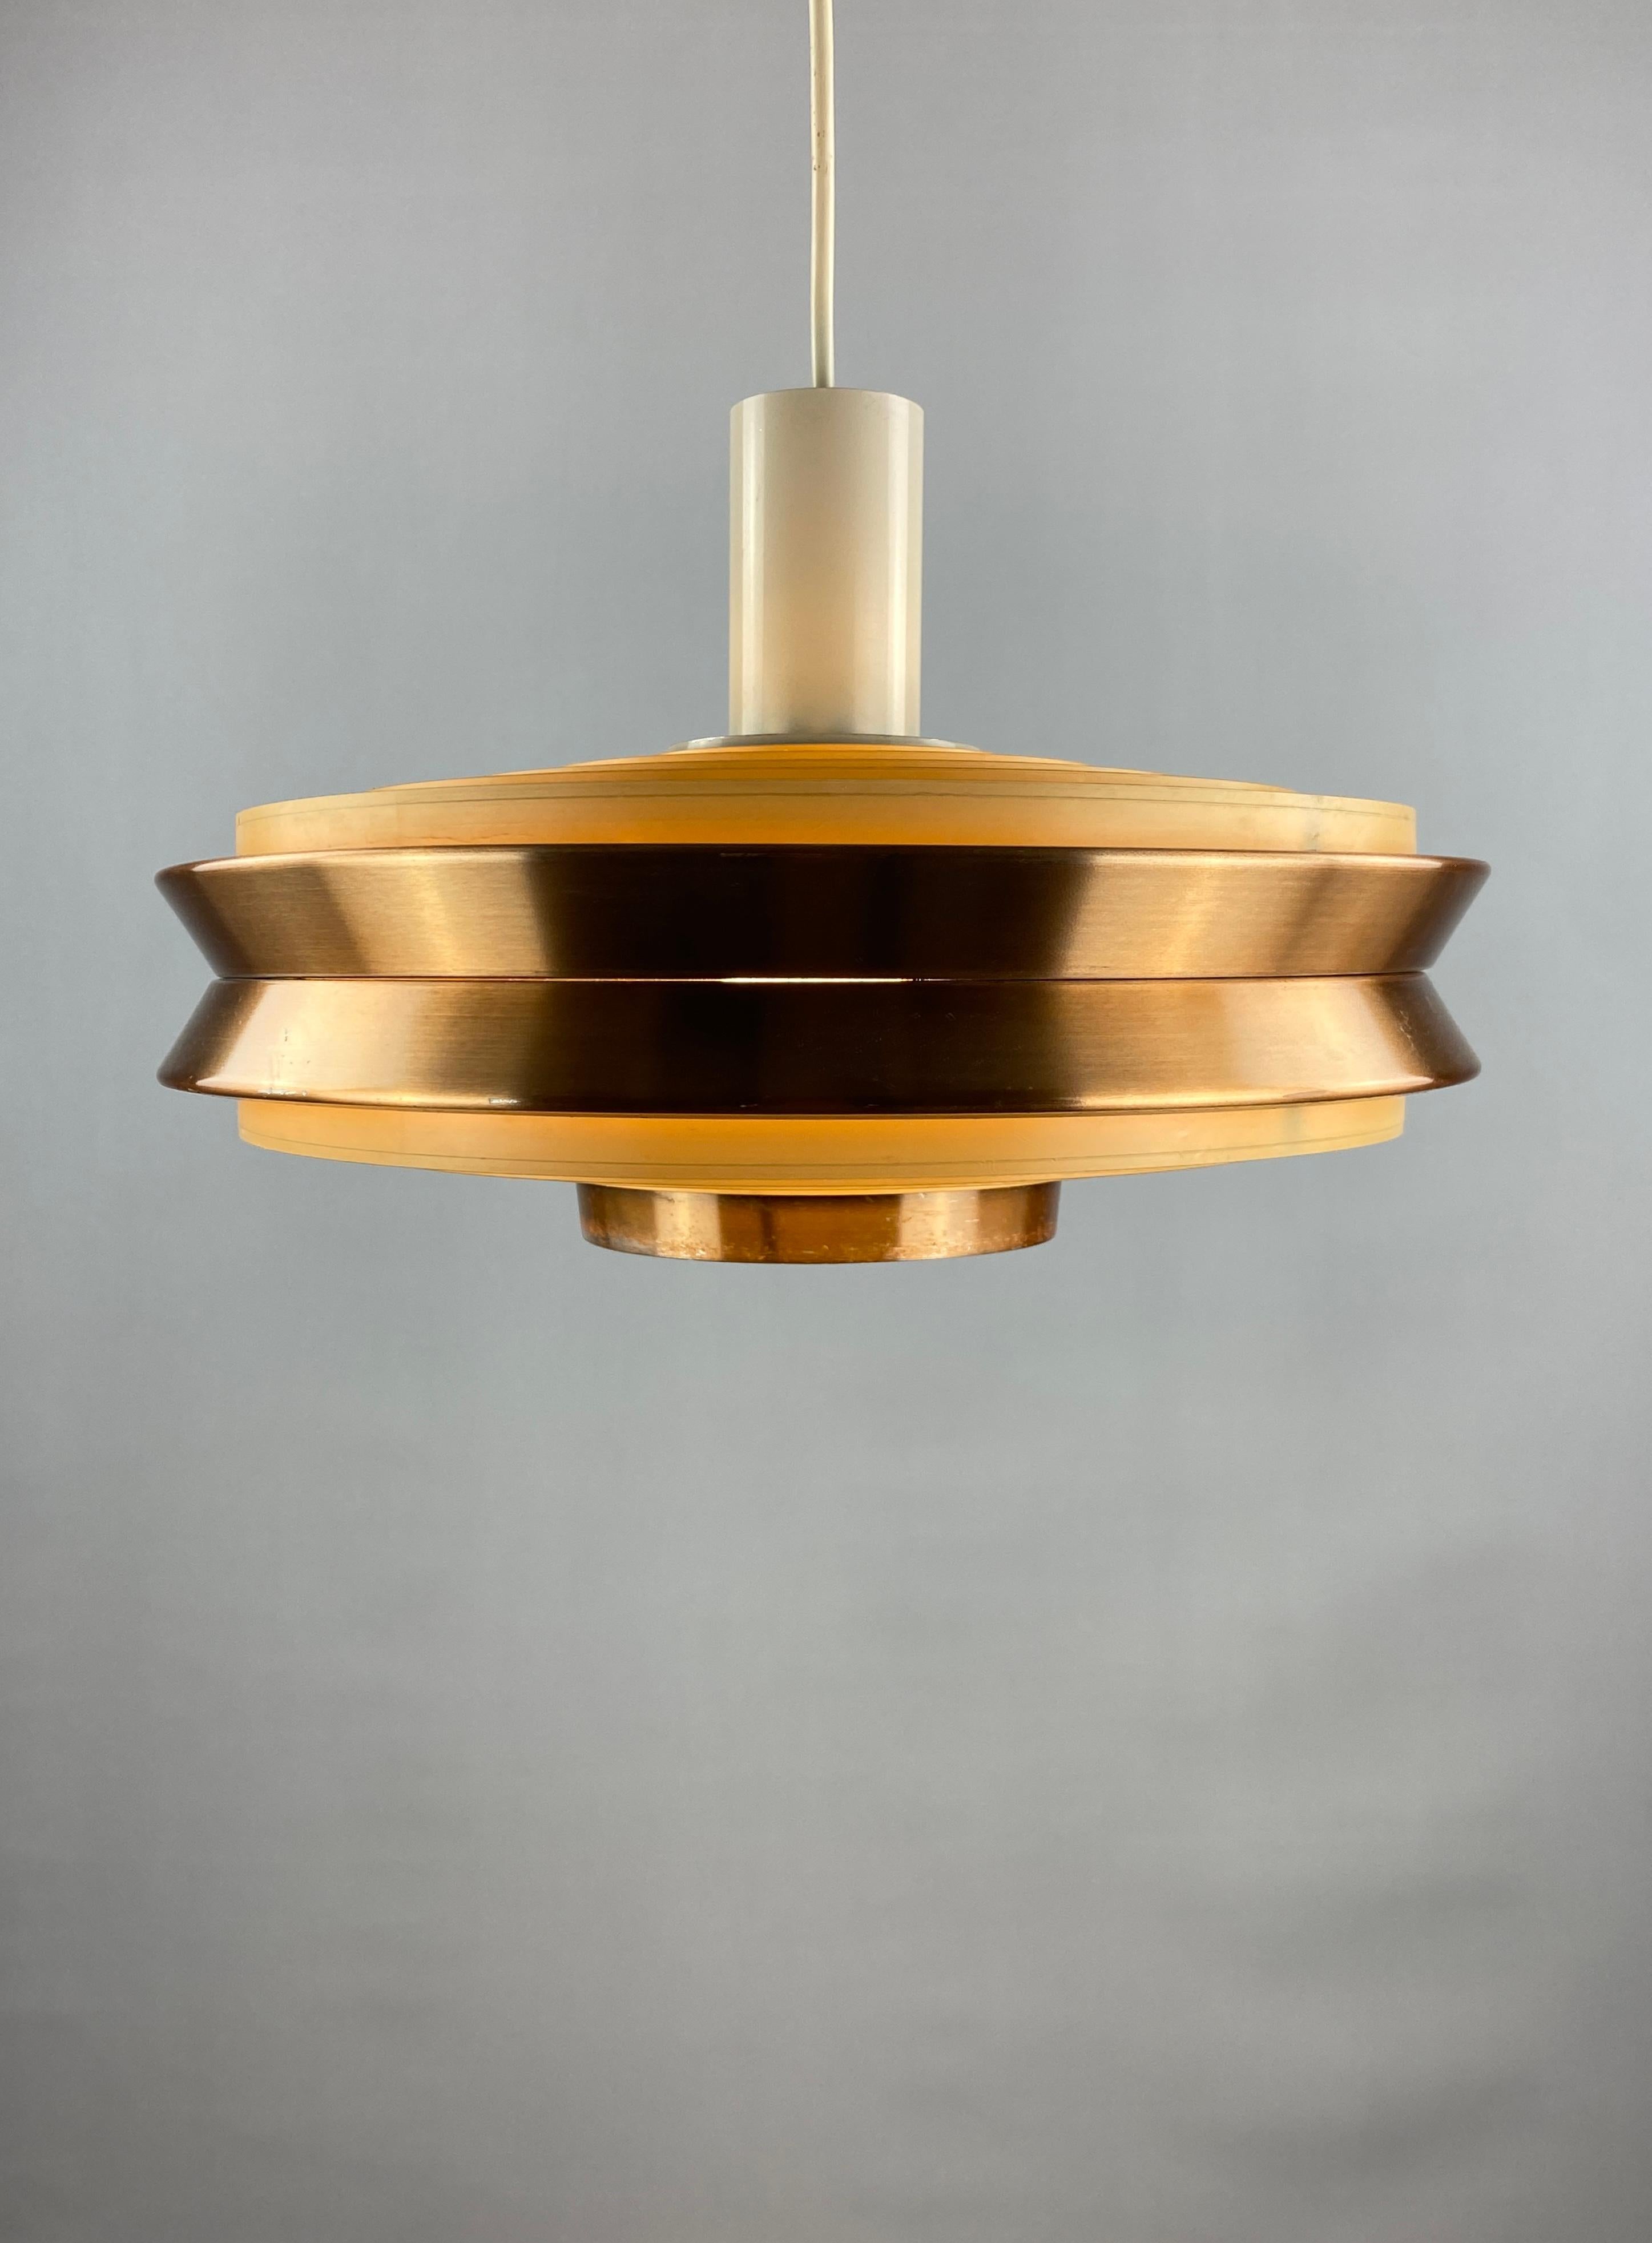 Elegant UFO shaped pendant lamp designed by VEB Metalldrücker Halle from the DDR, East Germany in the 1970's. Made by metal and copper colored metal, the diffuser is made of plastic.

Provides very warm light through the